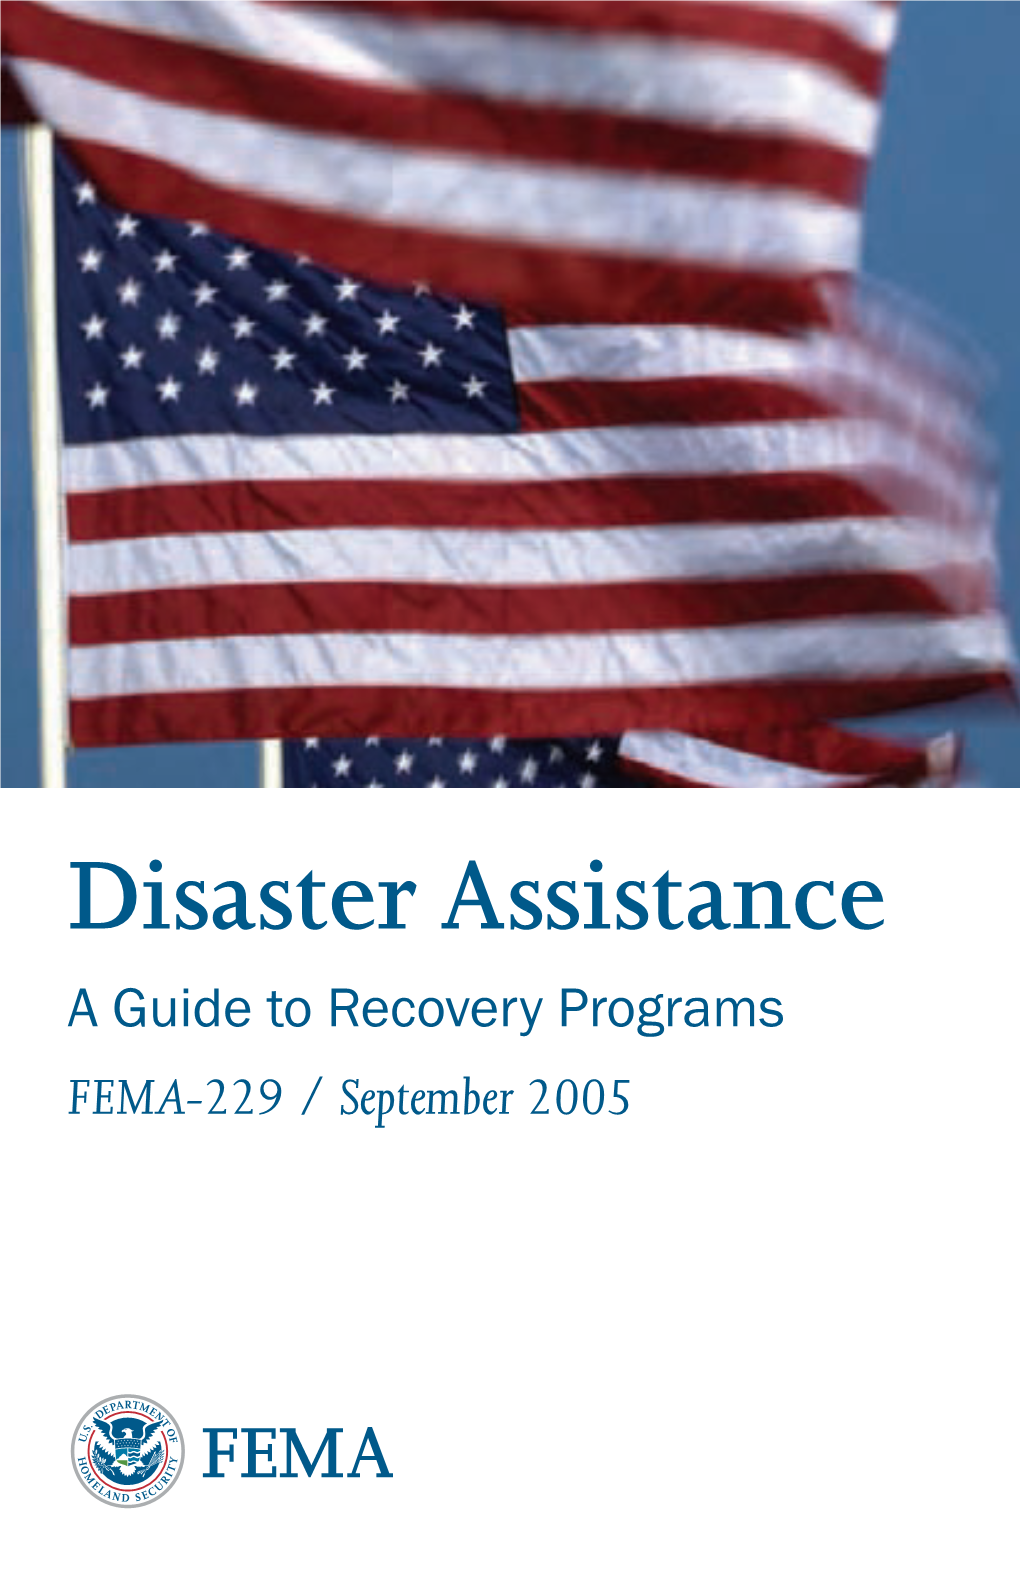 Disaster Assistance a Guide to Recovery Programs FEMA-229 / September 2005 Signatories to the National Response Plan